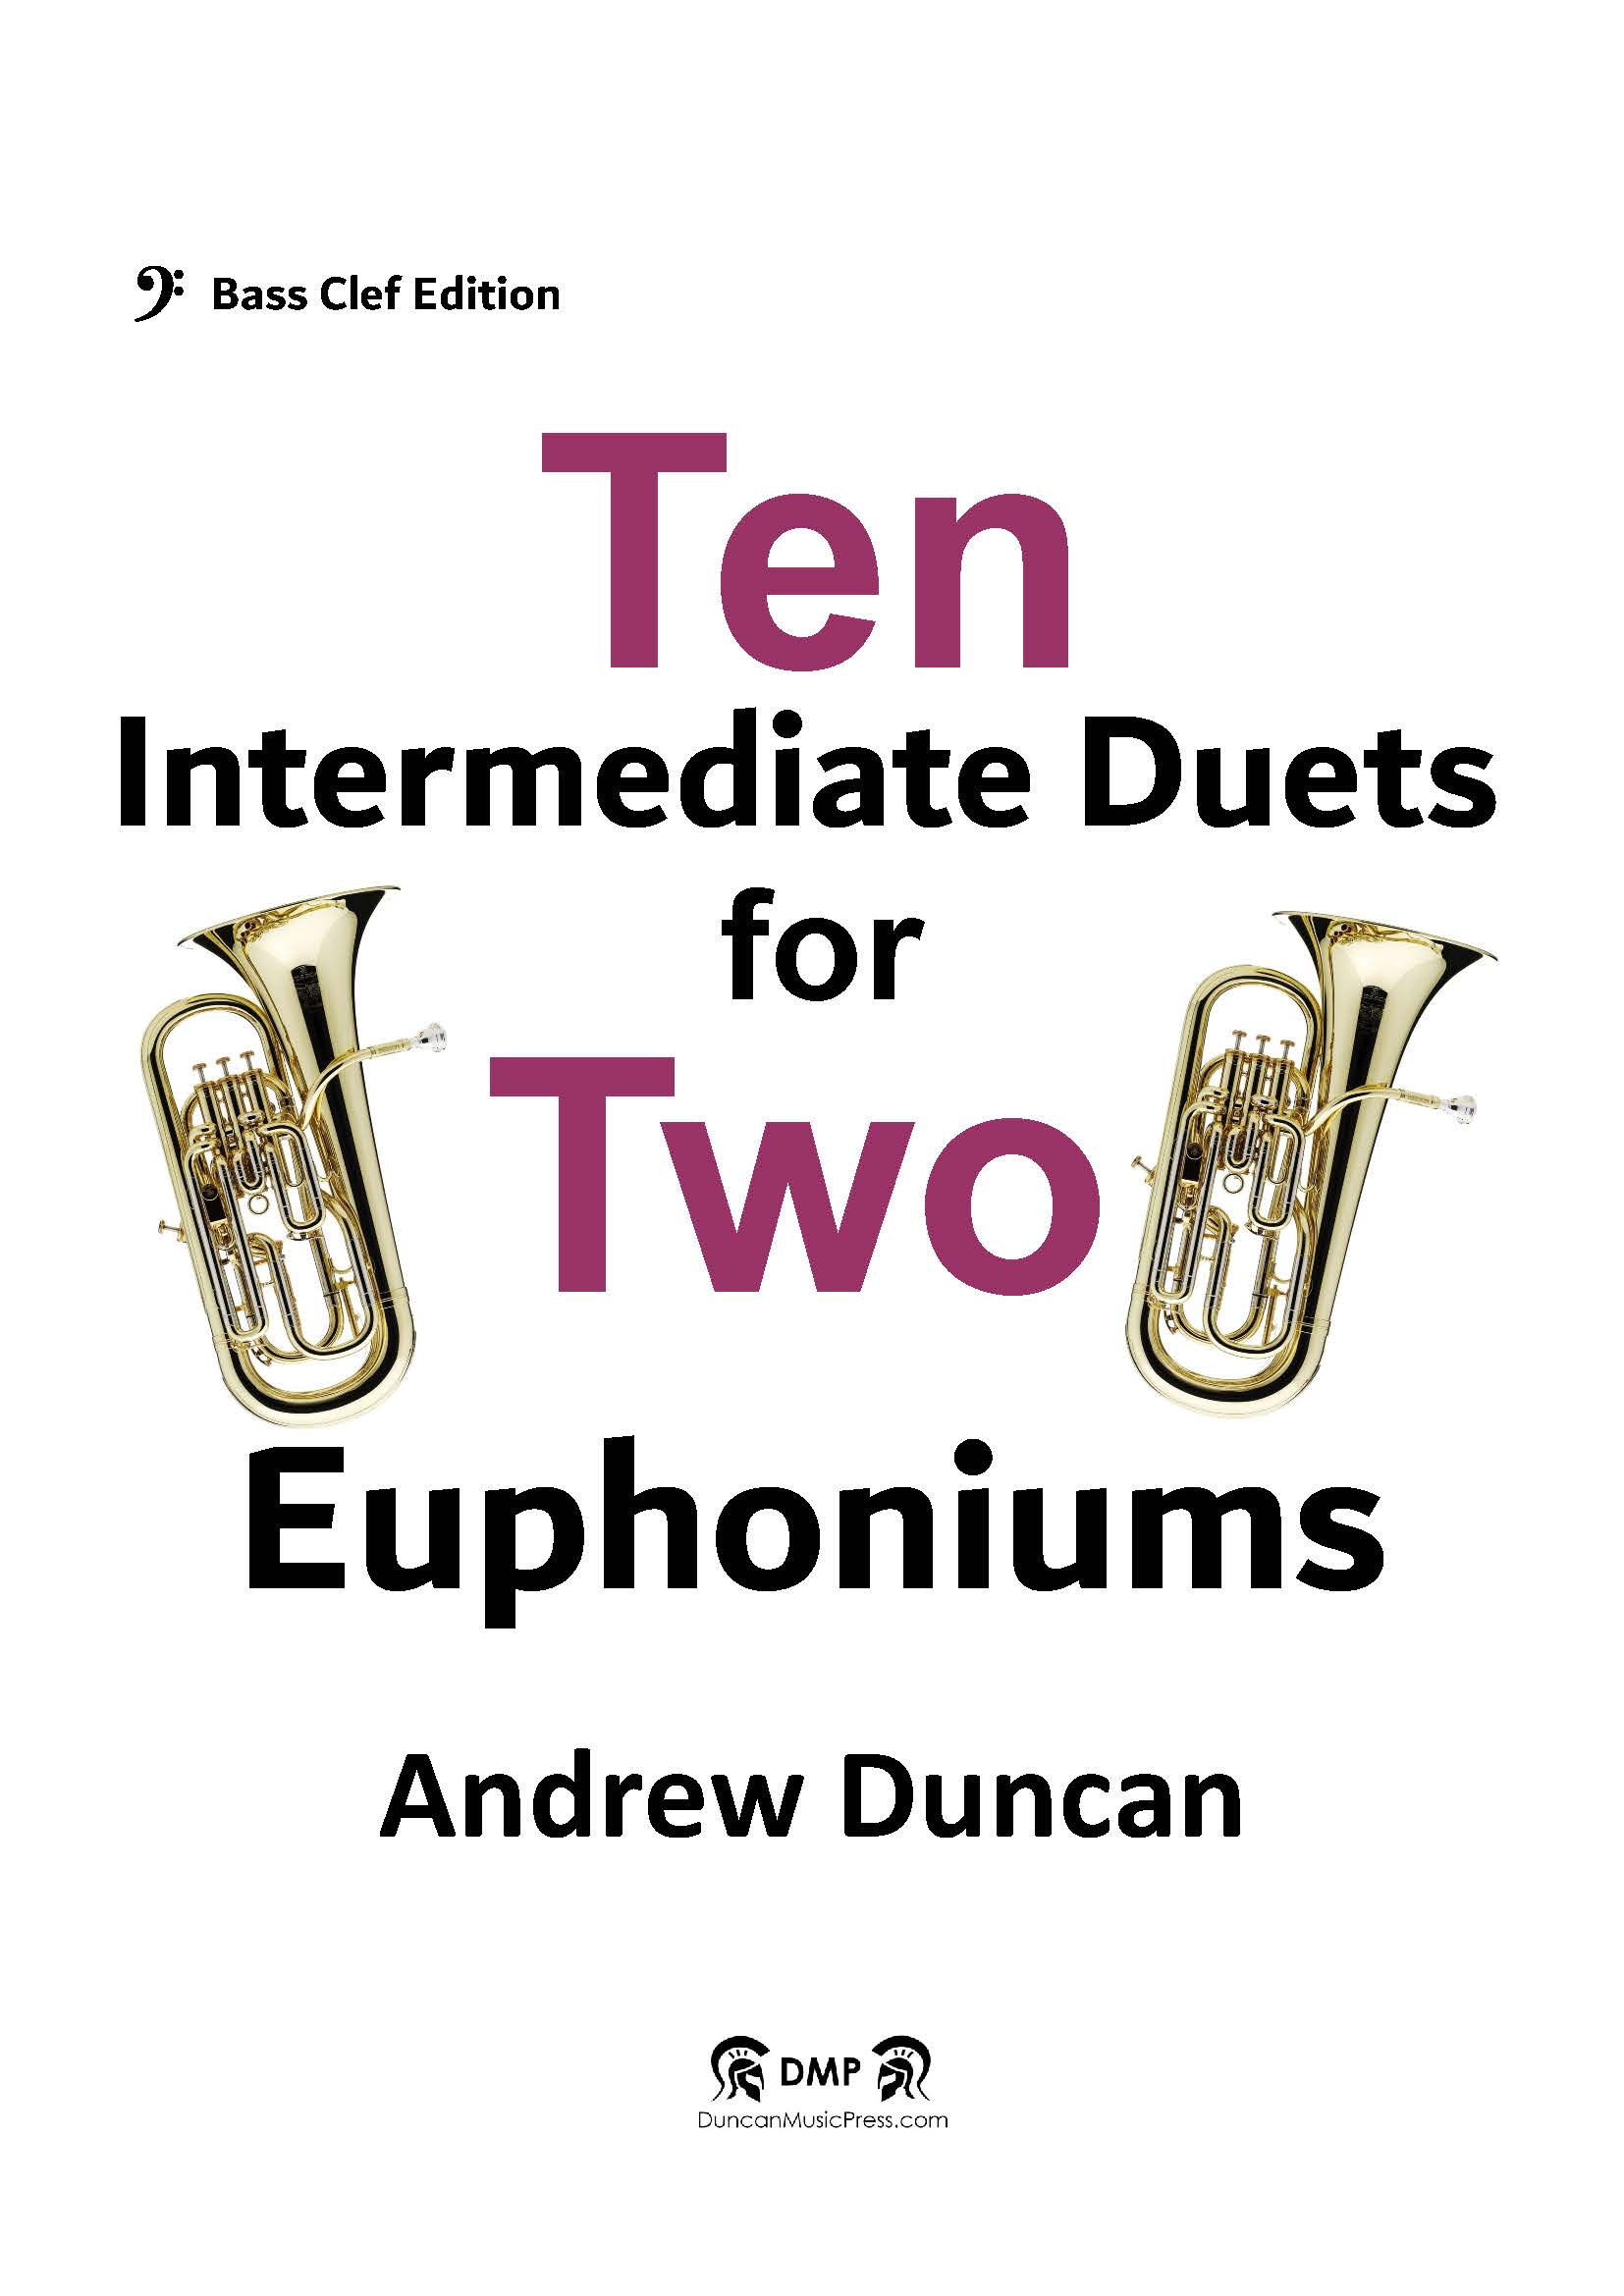 Ten Intermediate Duets for Two Euphoniums (BC) - Andrew Duncan